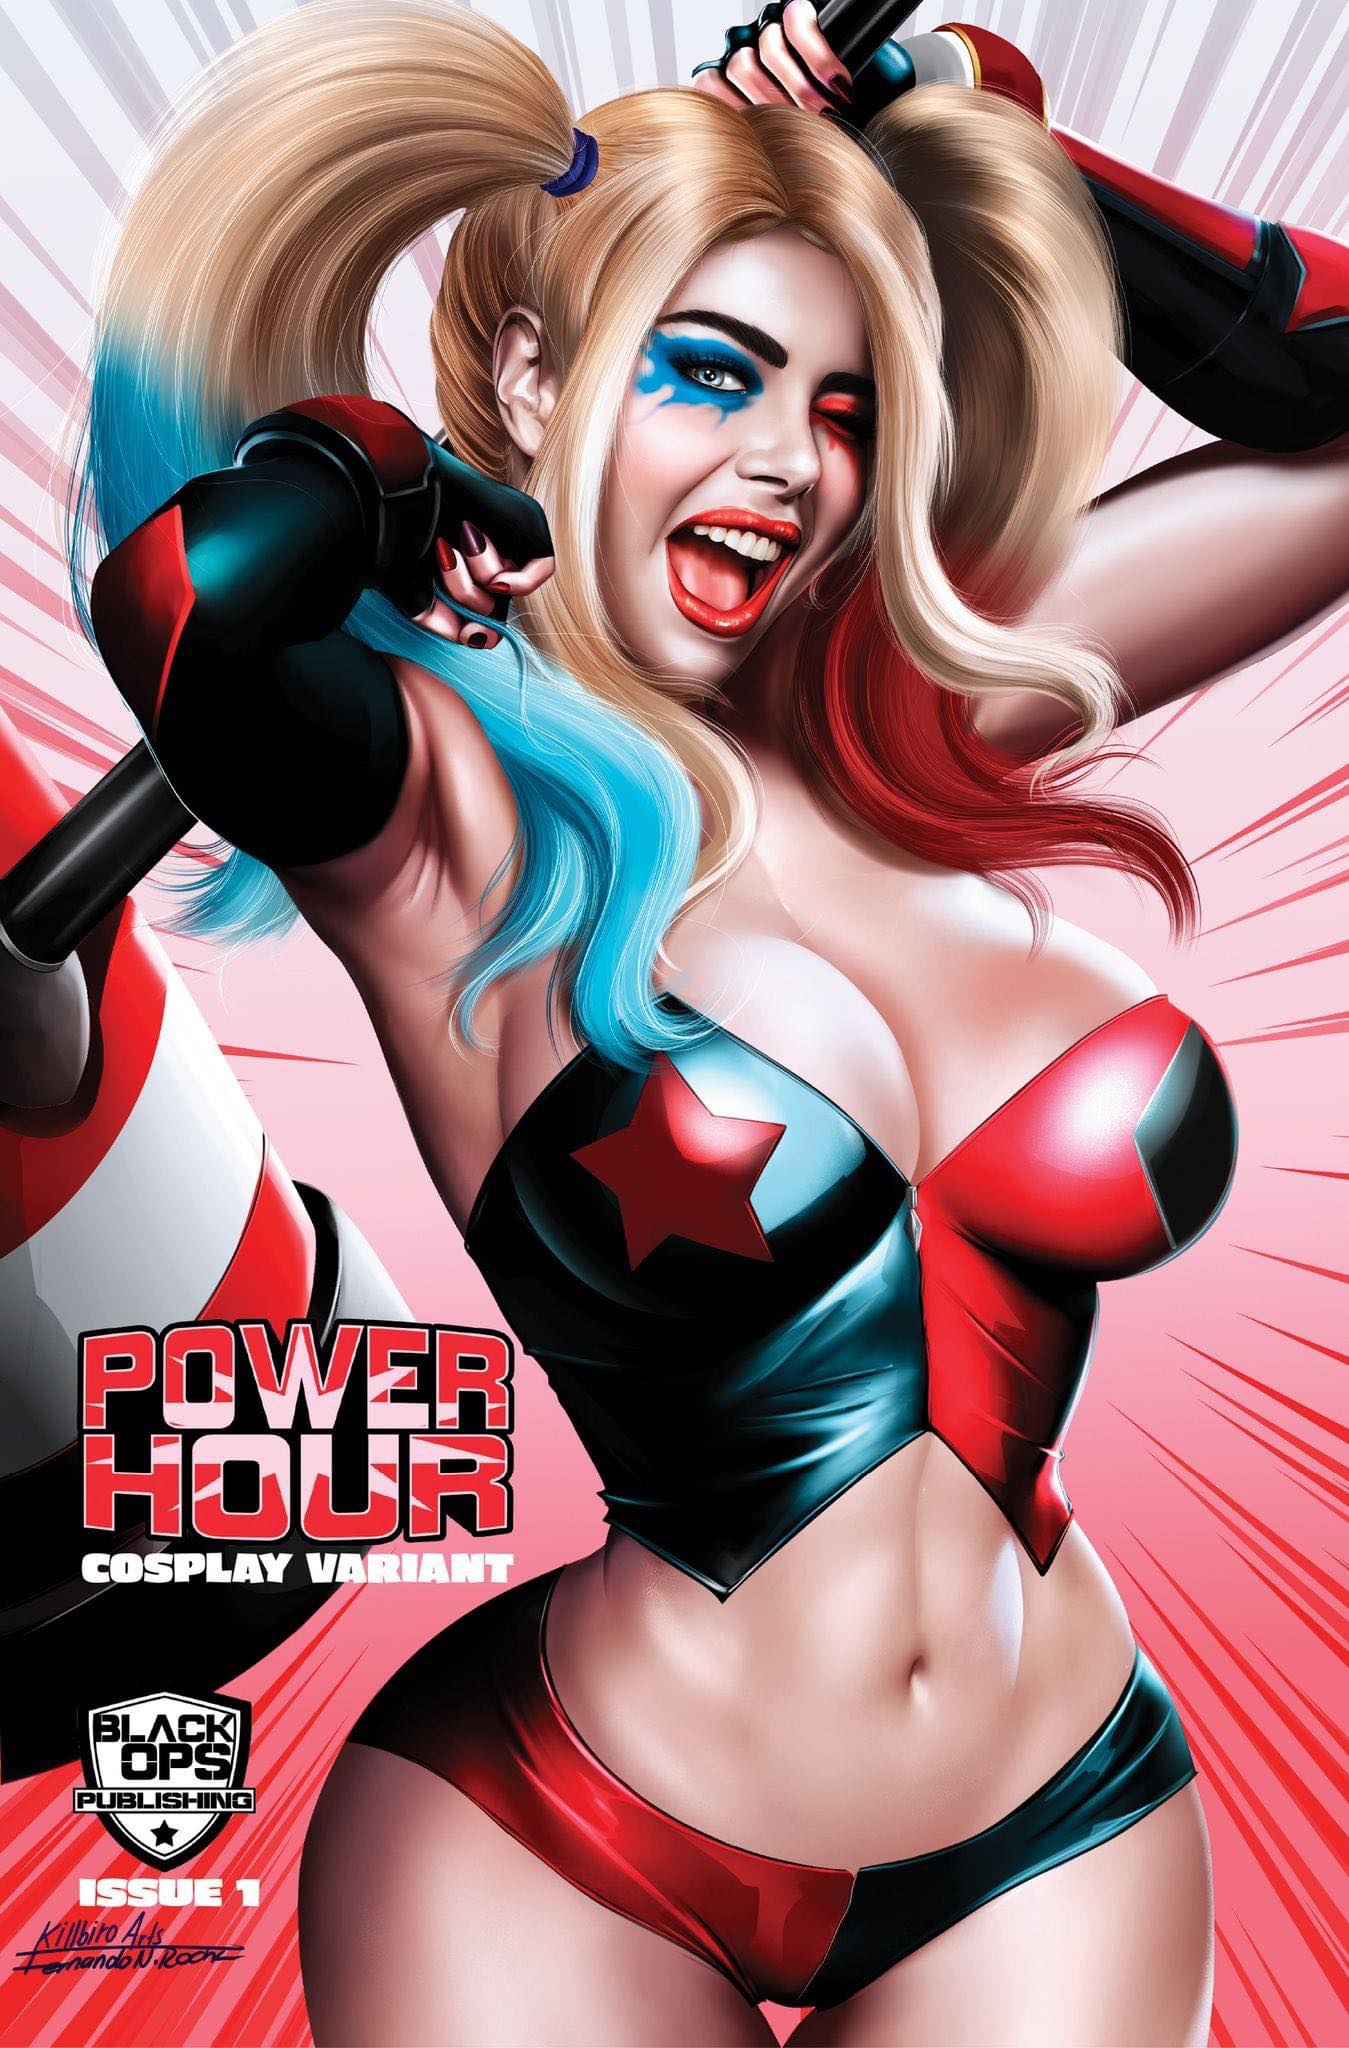 POWER HOUR ROCHA HQ COSPLAY EXCLUSIVE VARIANT OPTIONS